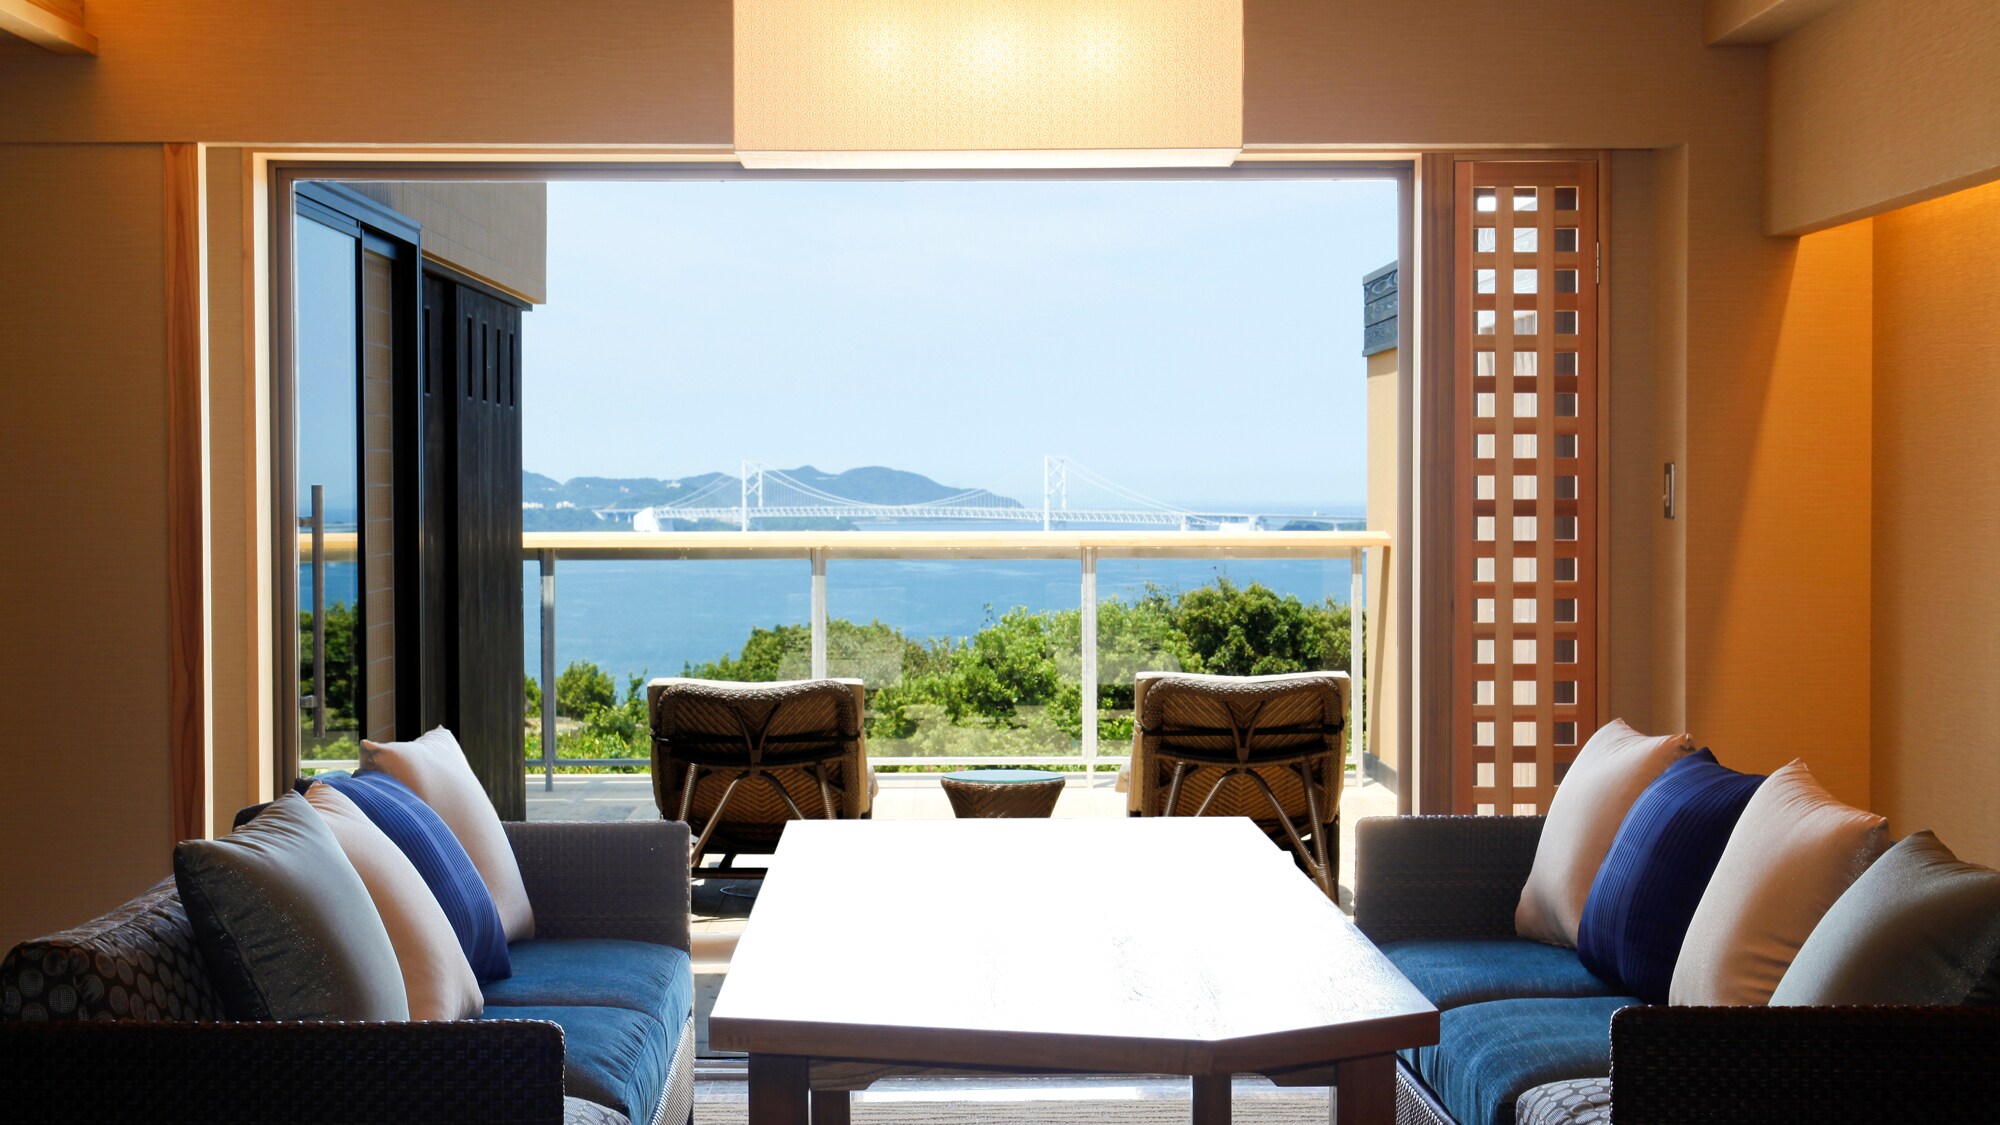 [Bettei Aozora <Away> Grand Opening in August 2012] Special guest room with your own private open-air bath and terrace